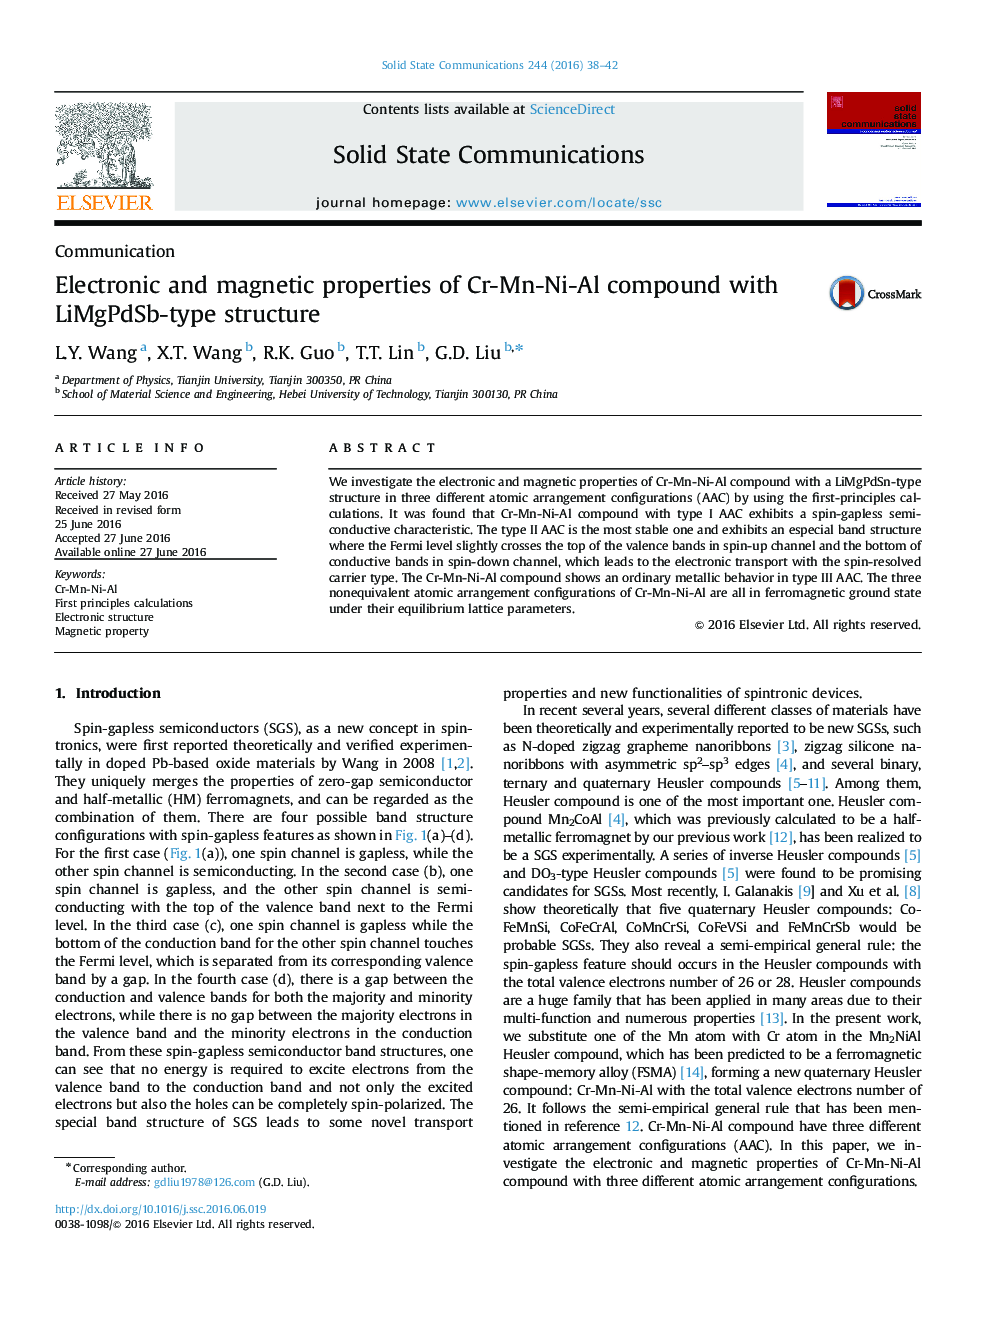 Electronic and magnetic properties of Cr-Mn-Ni-Al compound with LiMgPdSb-type structure